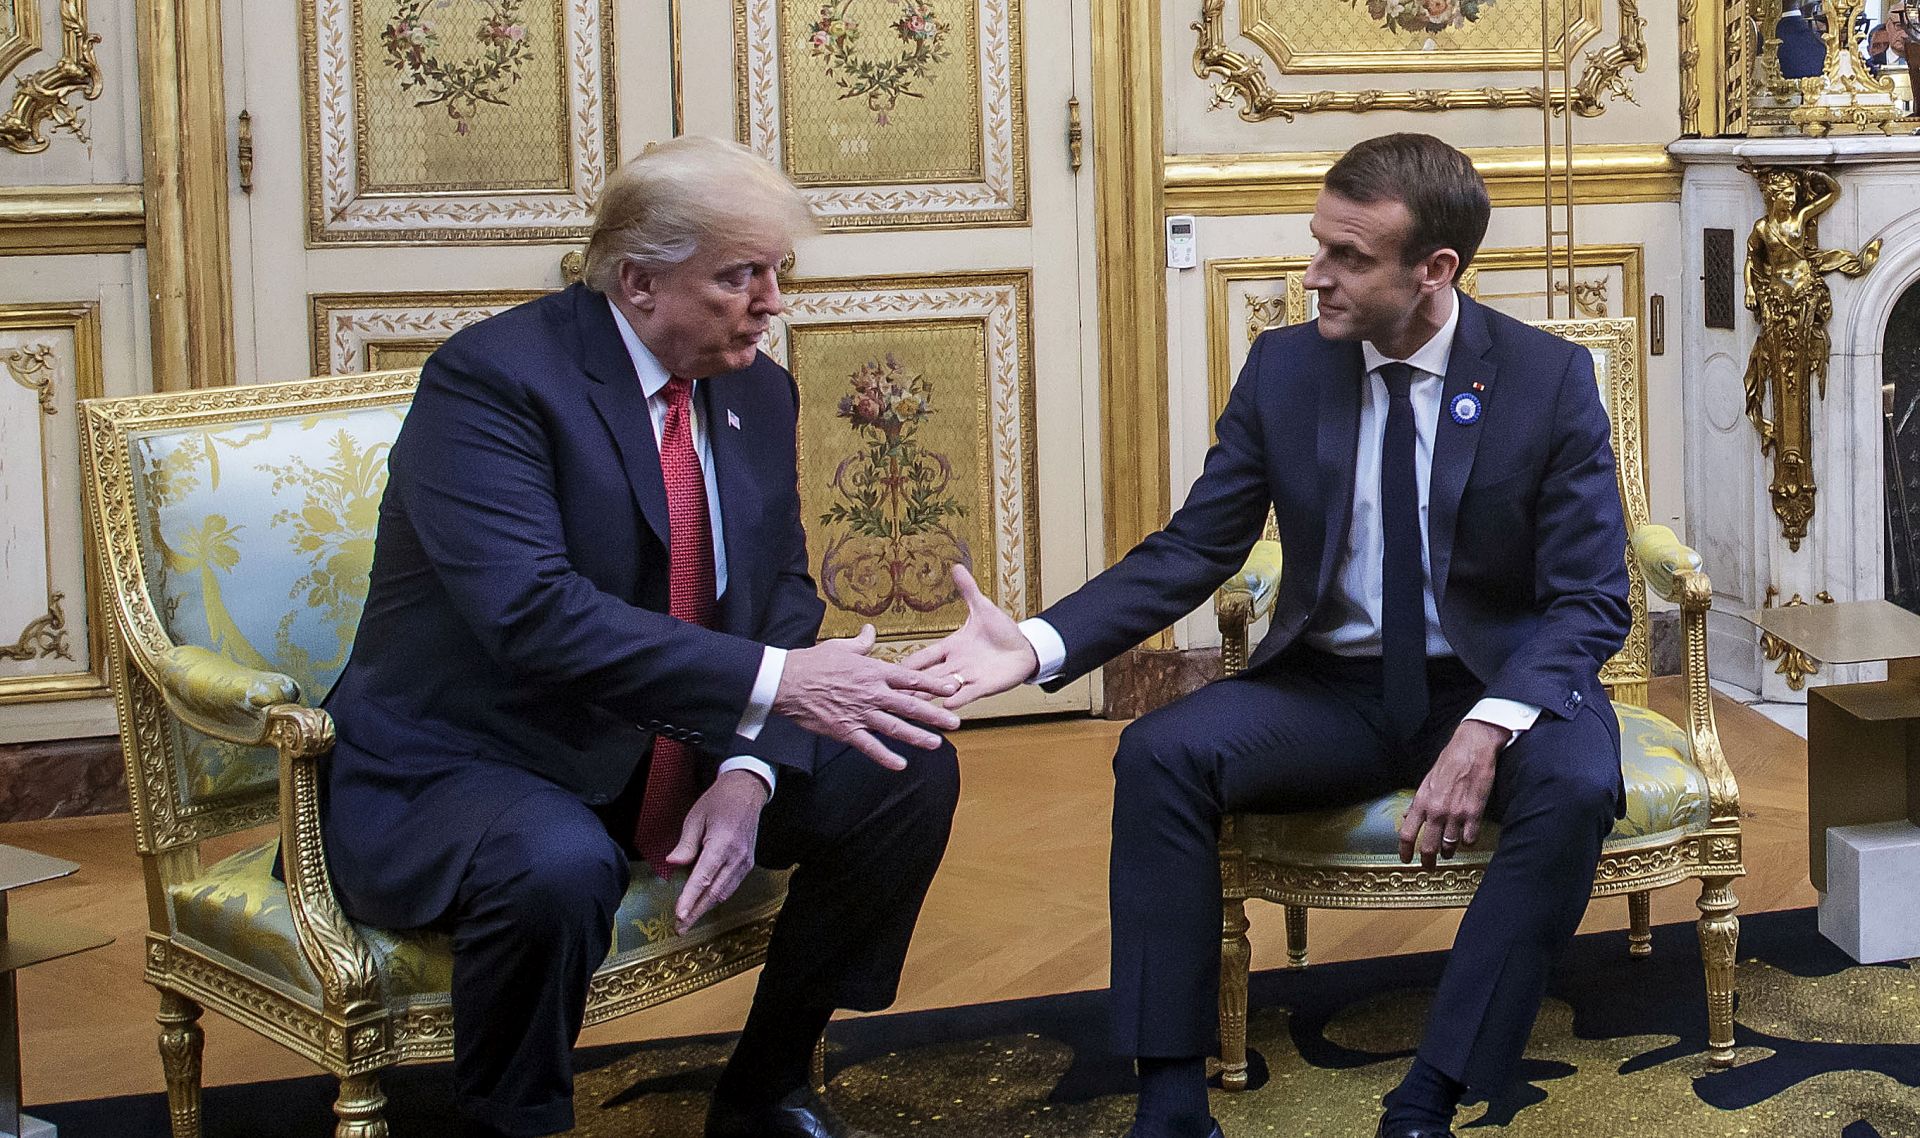 epa07154867 French President Emmanuel Macron (R) and US President Donald J. Trump (L) shake hands during their meeting at the Elysee palace in Paris, France, 10 November 2018, ahead of the international ceremony for the Centenary of the WWI Armistice of 11 November 1918. US President Trump along with other Heads of States and Governments will join on 11 November the commemoration ceremonies for their countries' fallen WW1 soldiers in France.  EPA/CHRISTOPHE PETIT TESSON / POOL